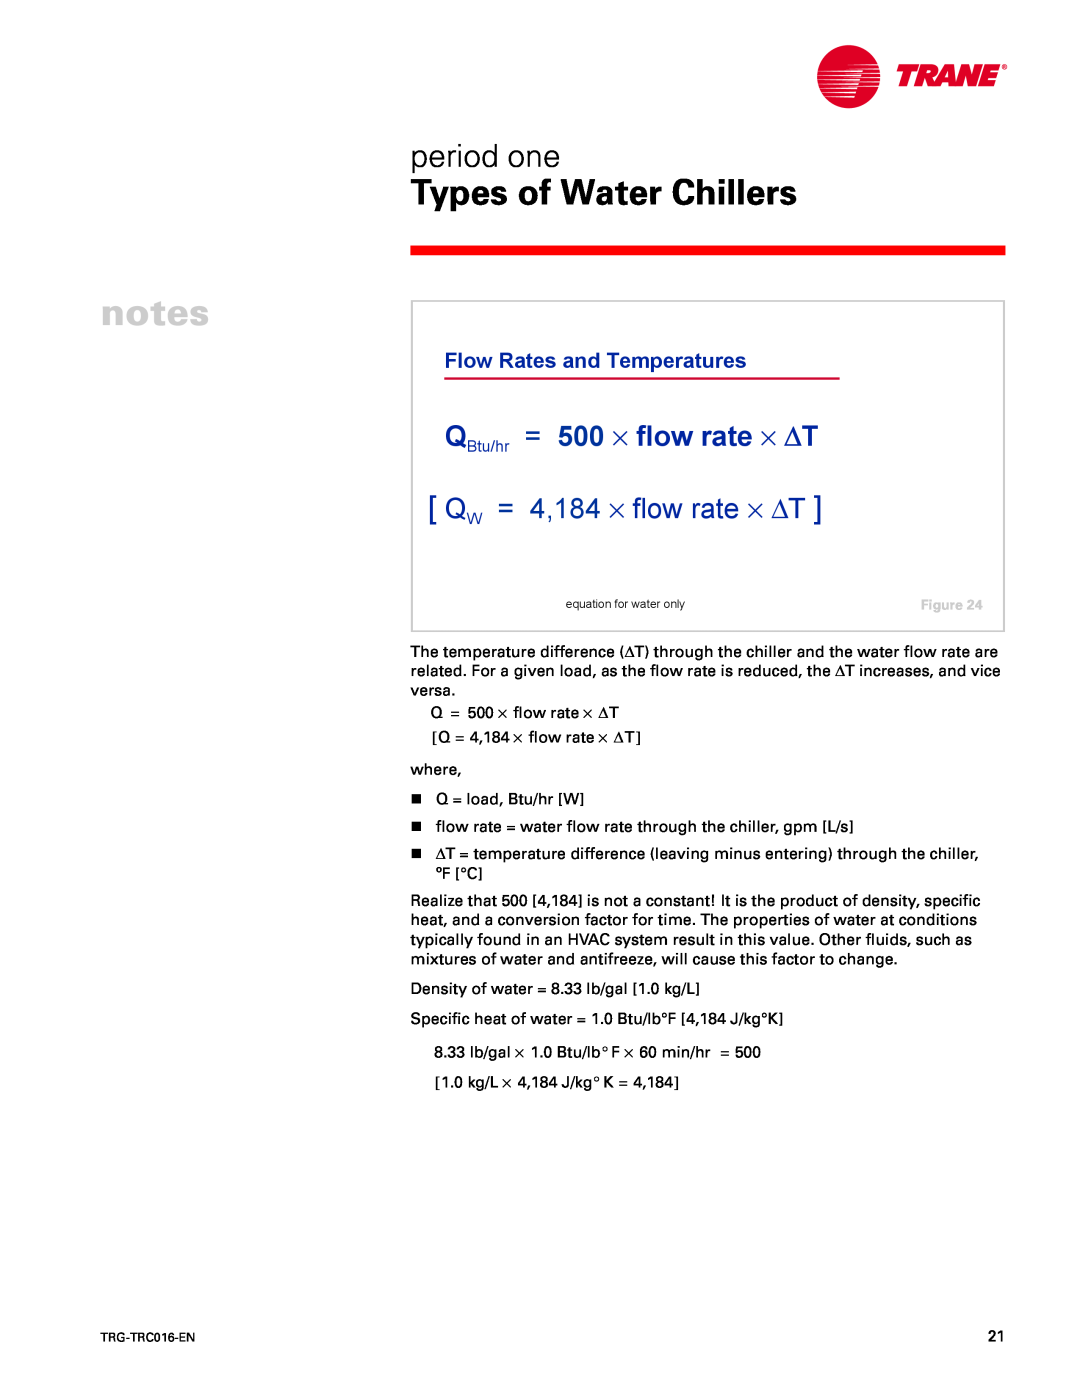 Trane TRG-TRC016-EN Flow Rates and Temperatures, notes, Types of Water Chillers, period one, QW = 4,184 ⋅ flow rate ⋅ ∆T 